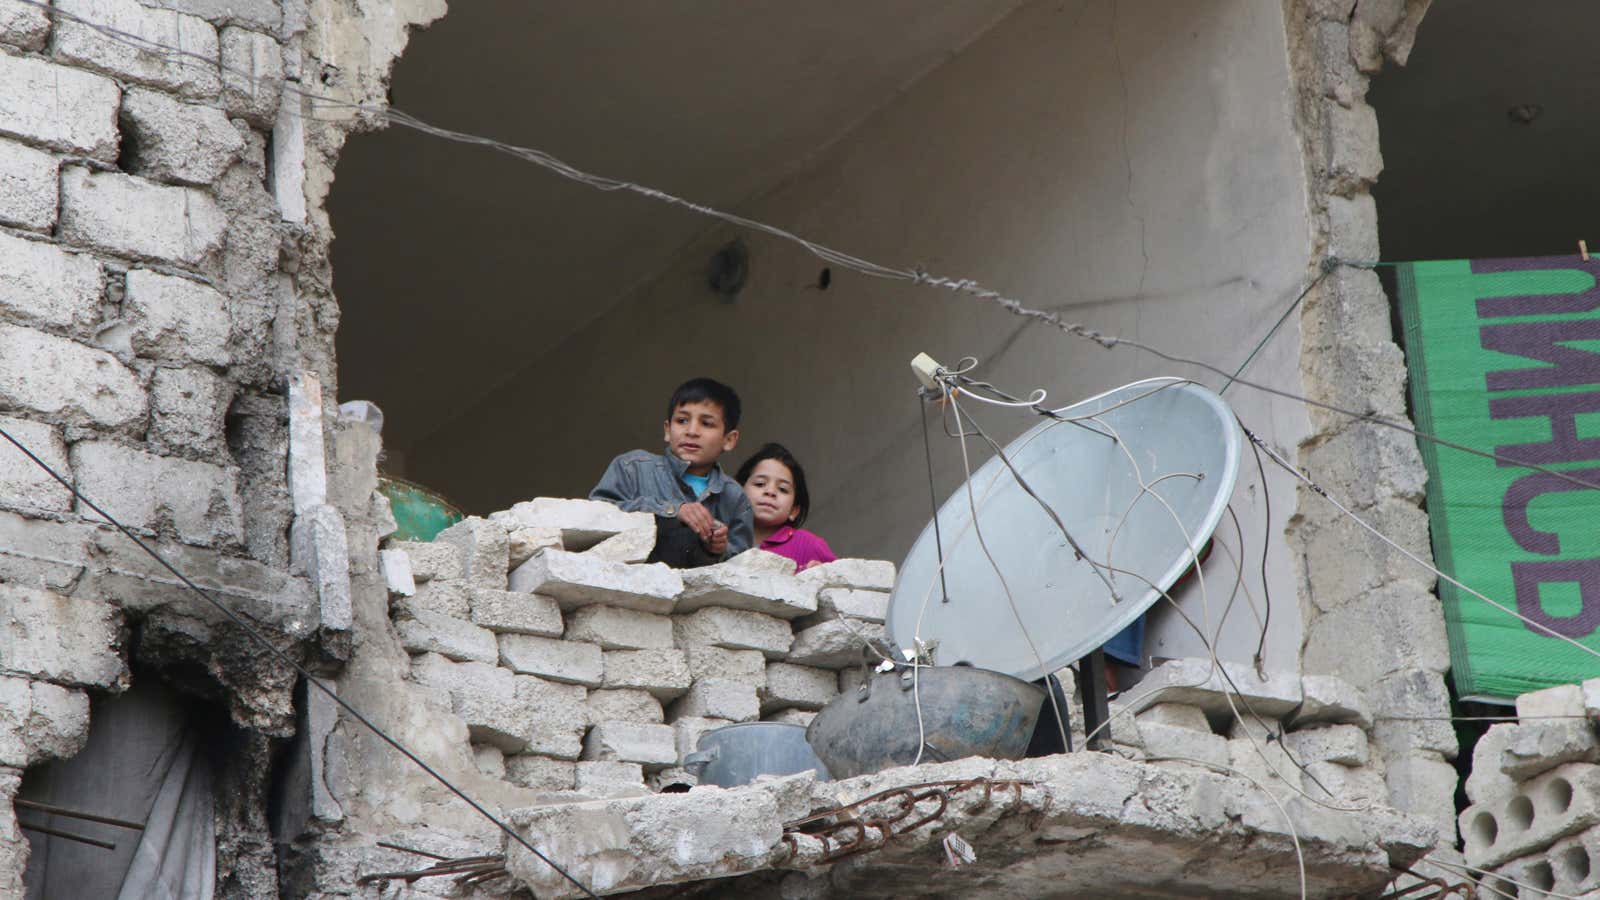 Children peer from a partially destroyed home in Aleppo, Syria.